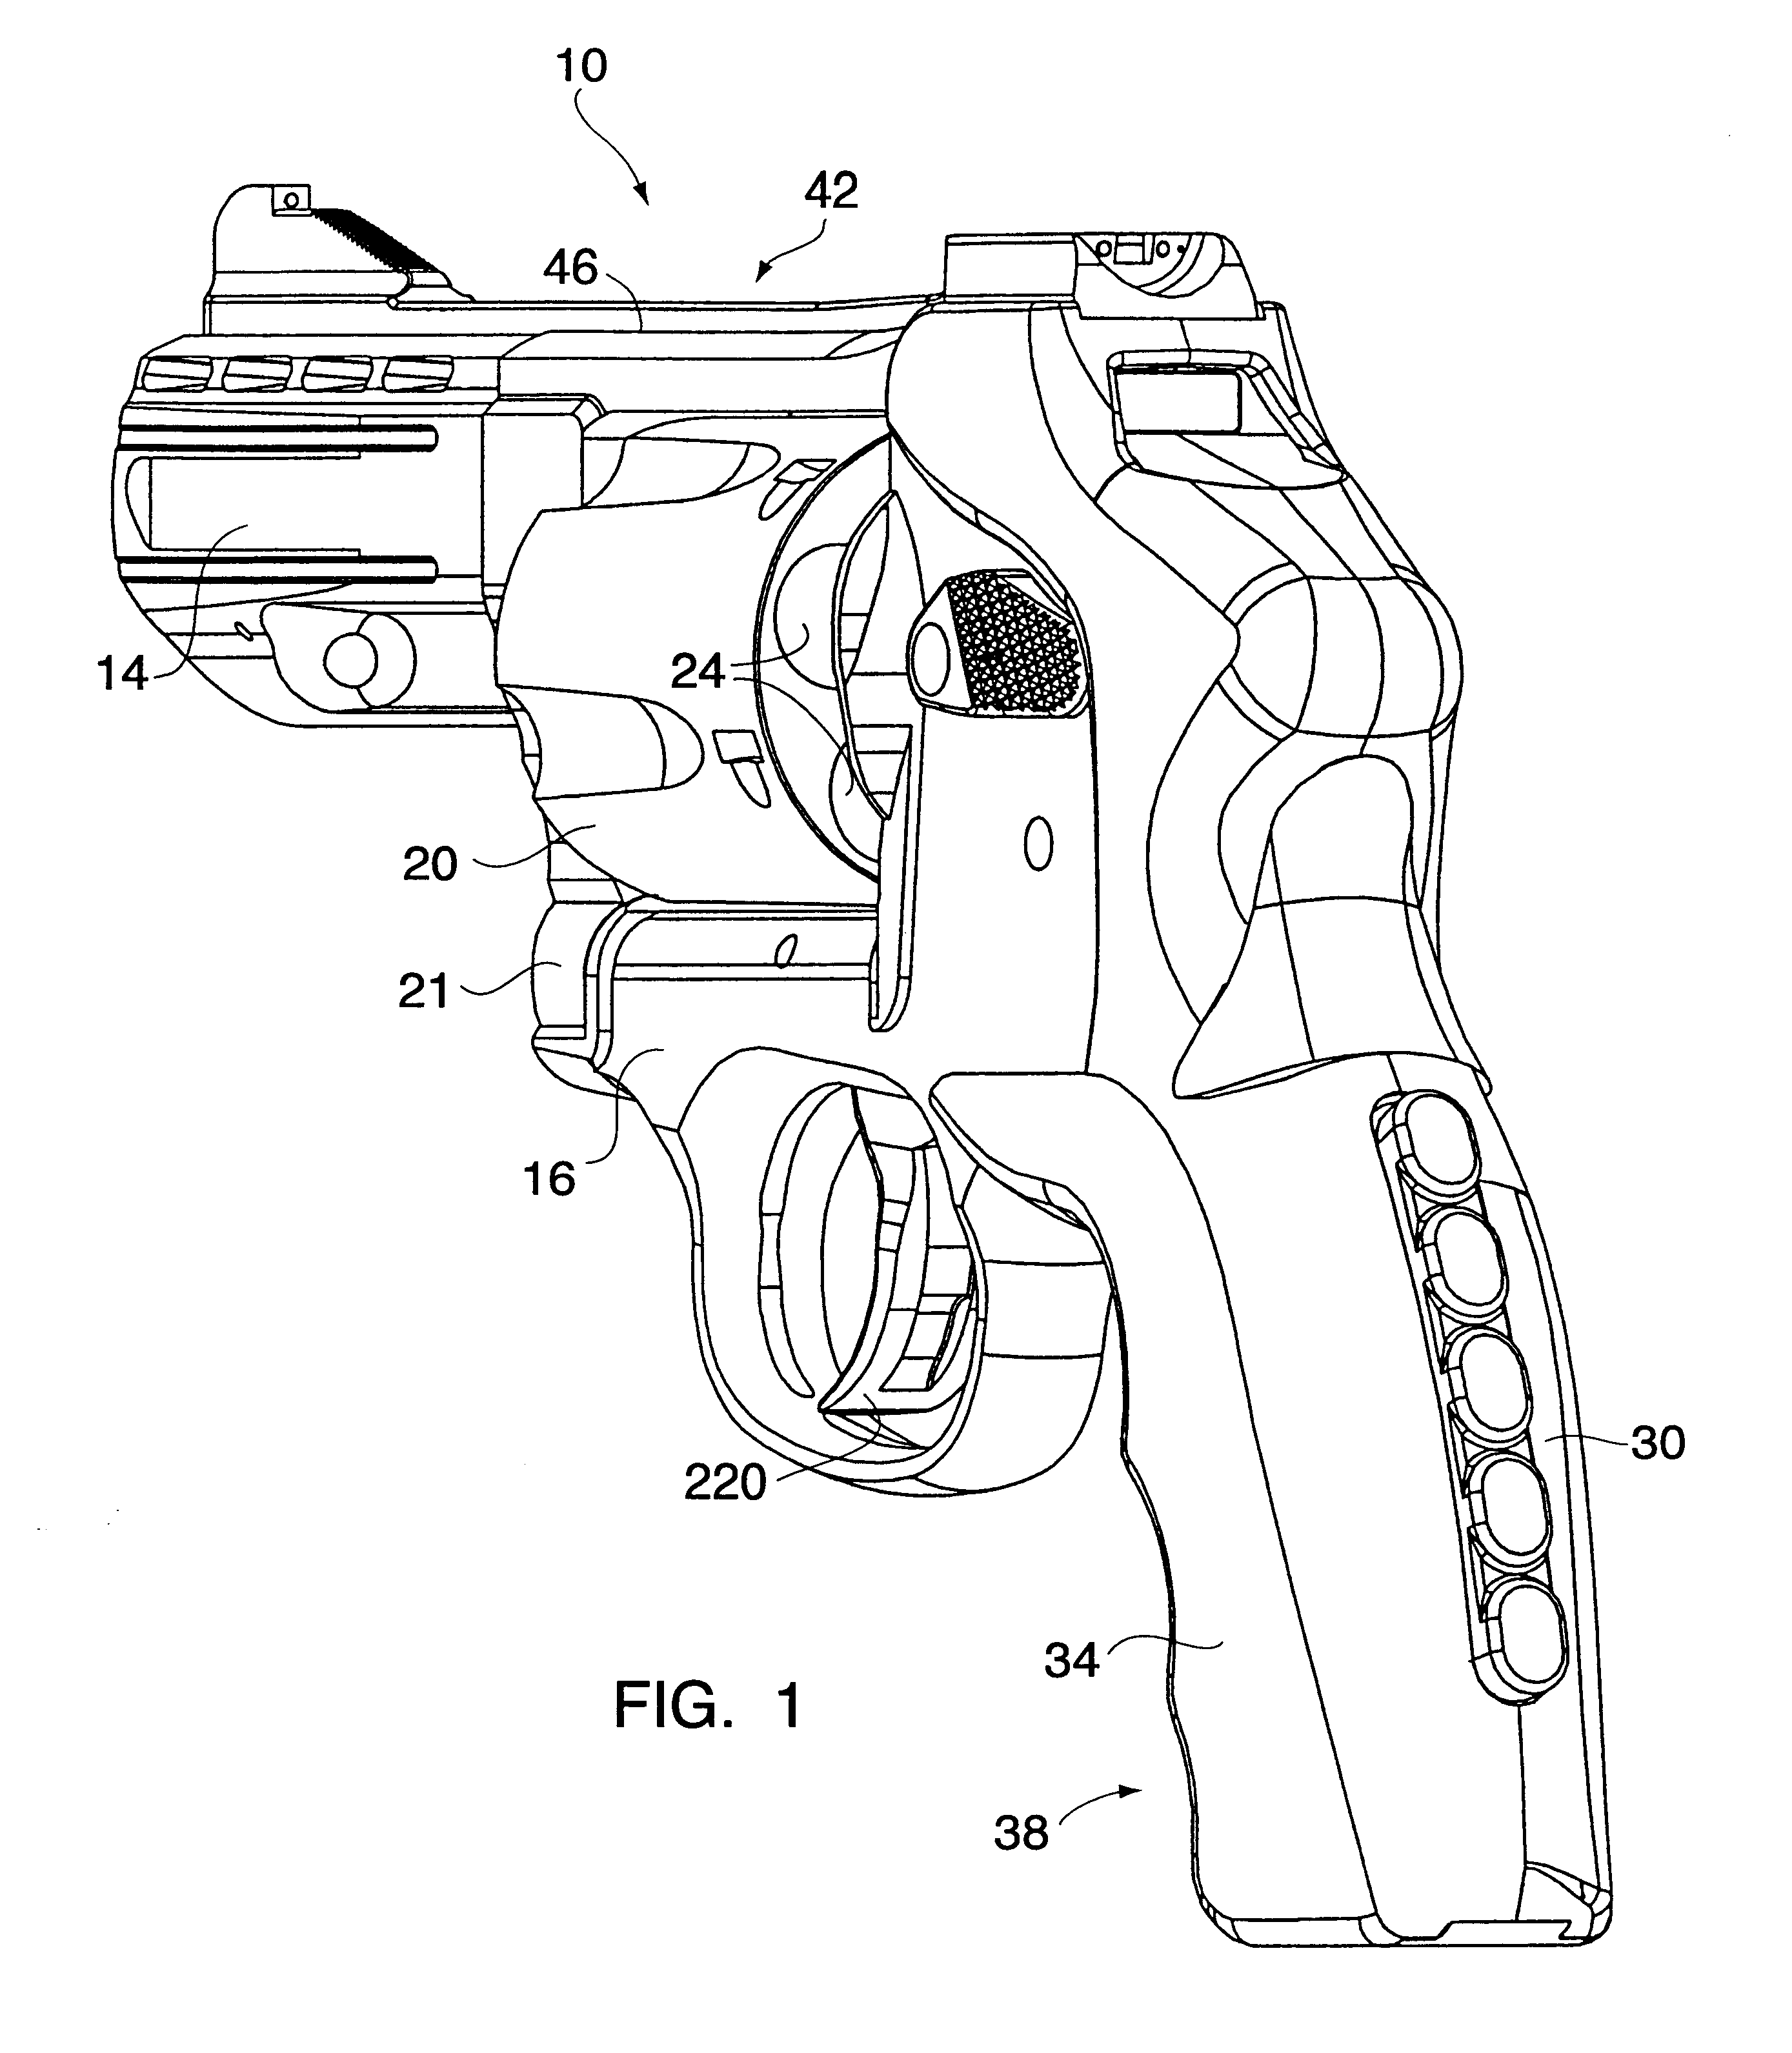 Security apparatus for authorizing use of a non-impact firearm